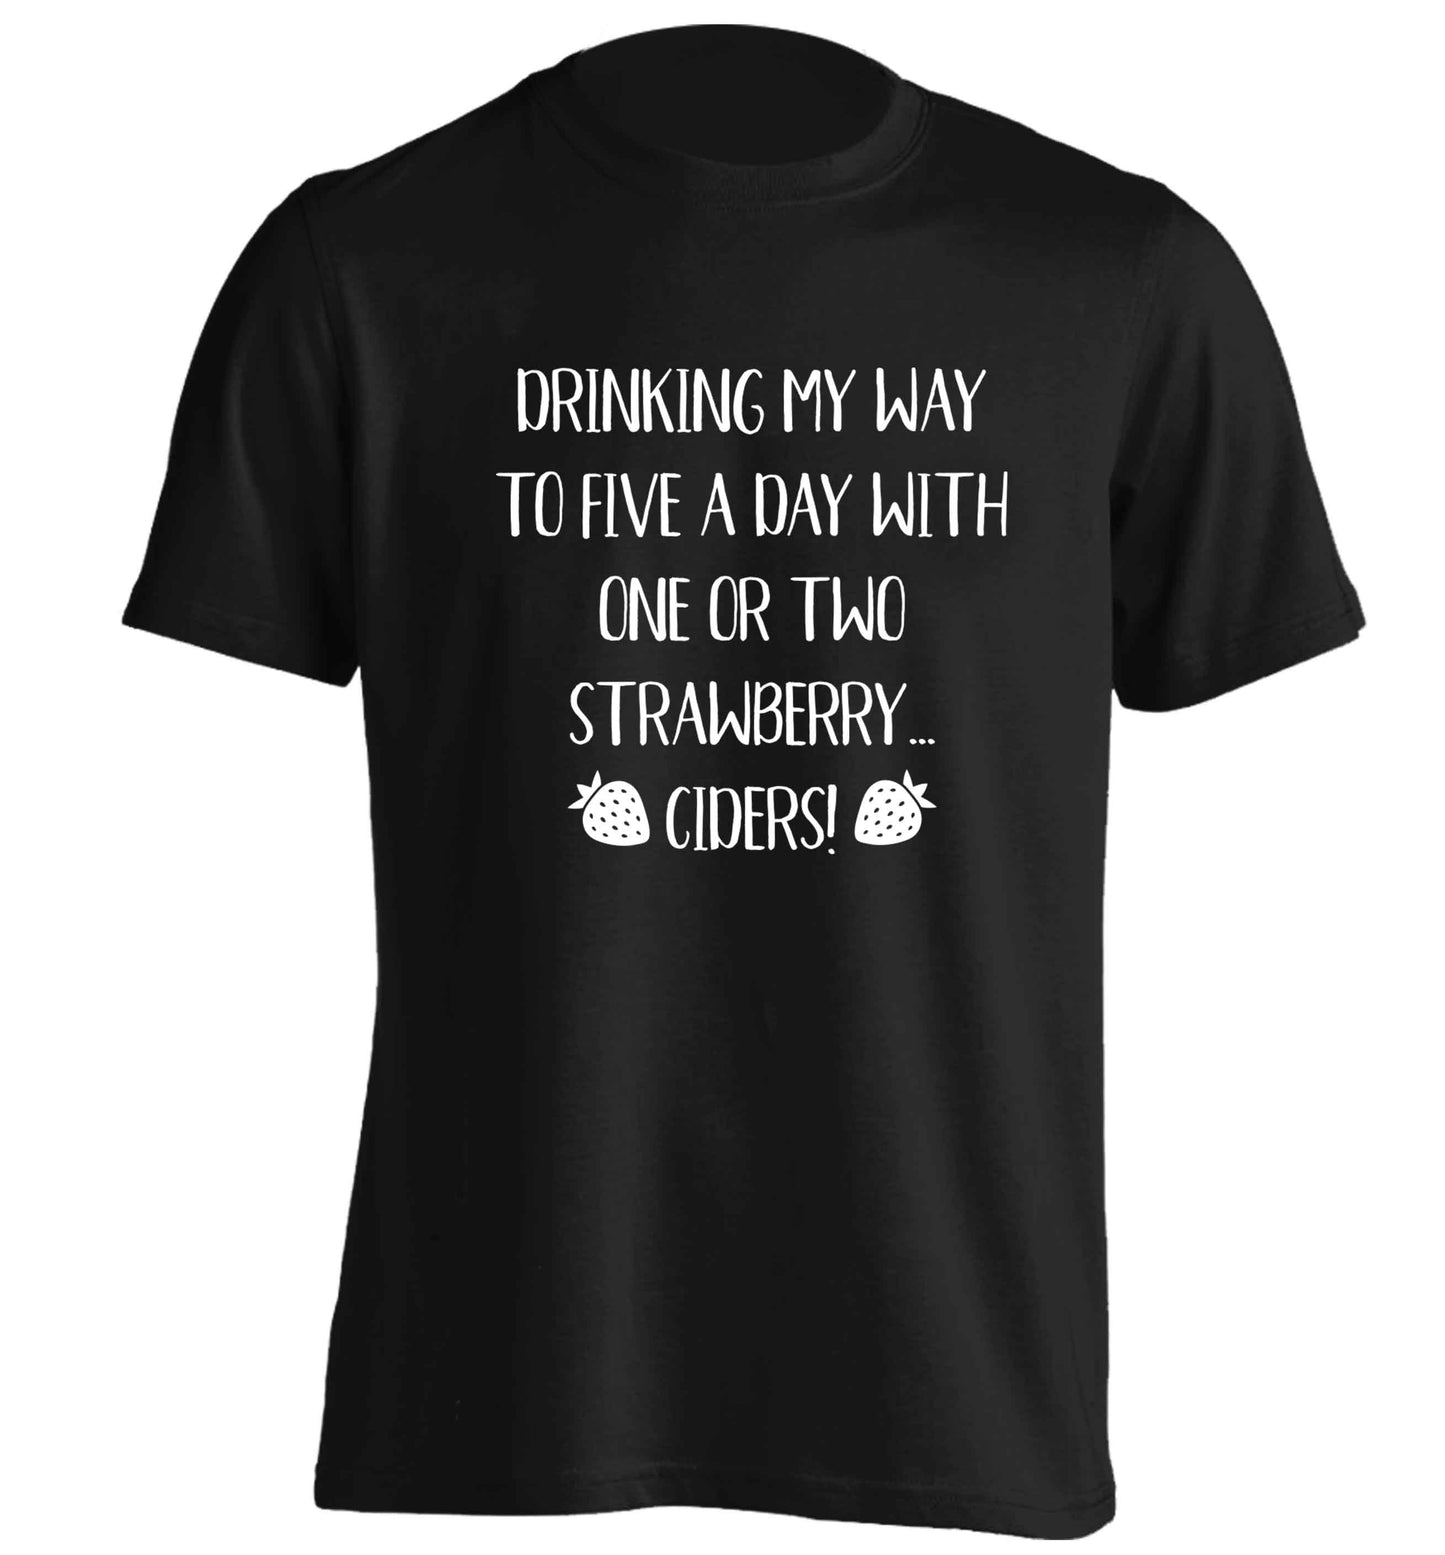 Drinking my way to five a day with one or two strawberry ciders adults unisex black Tshirt 2XL